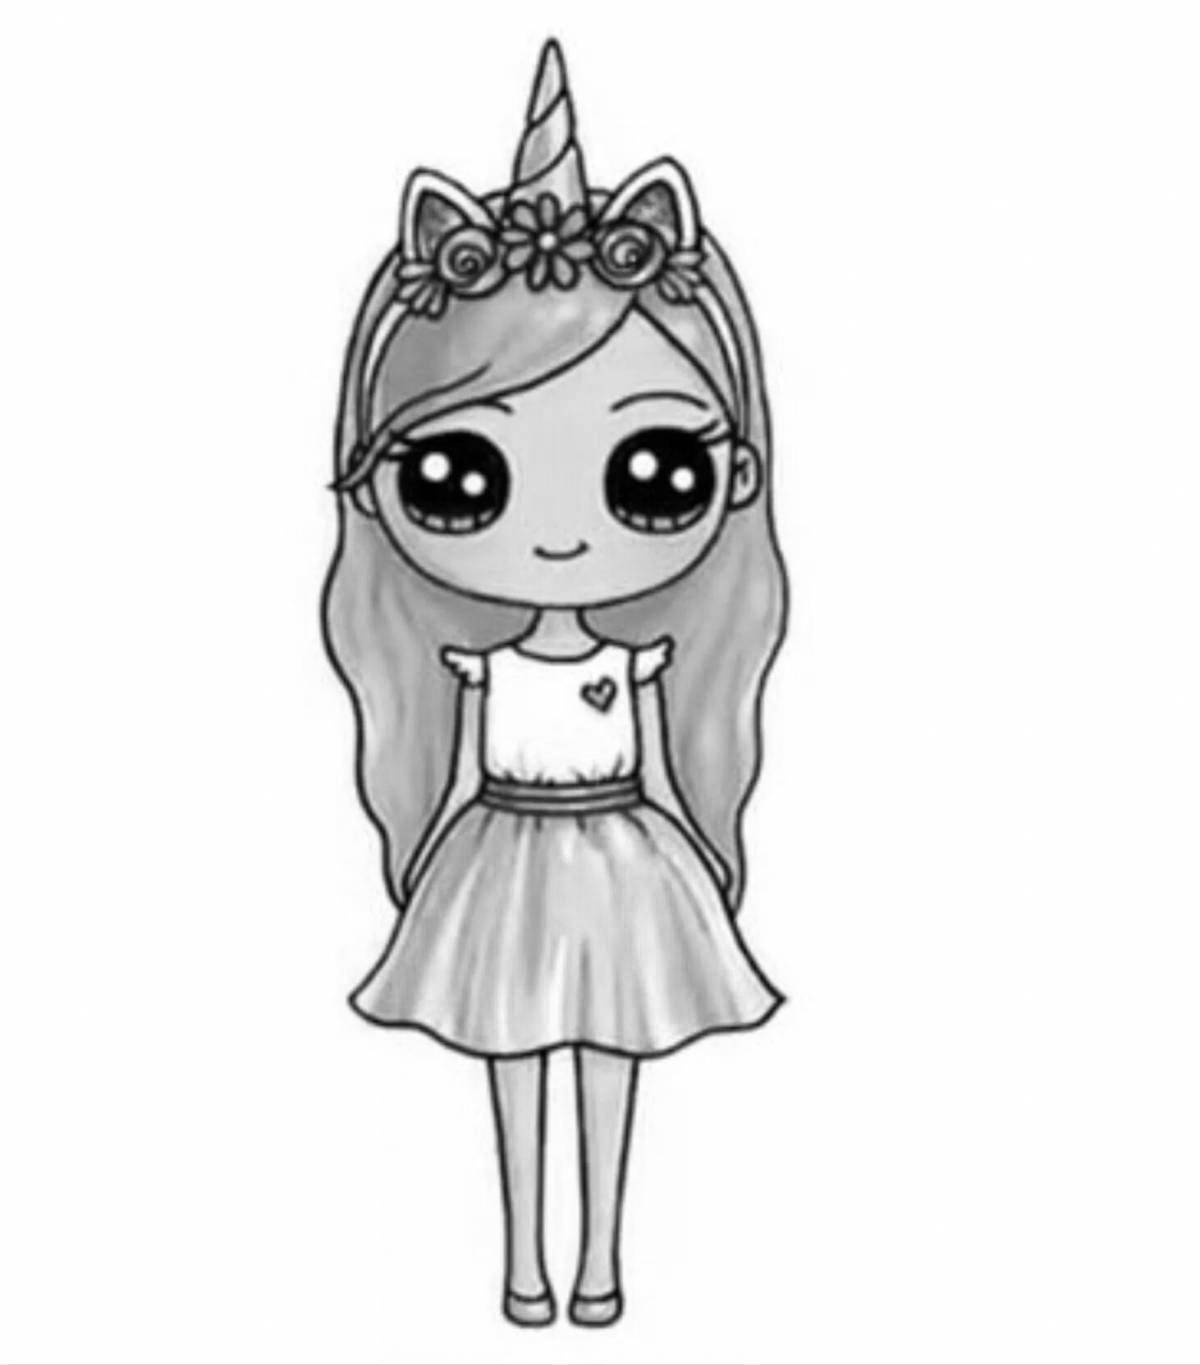 Sparkling coloring book of a girl dressed as a unicorn